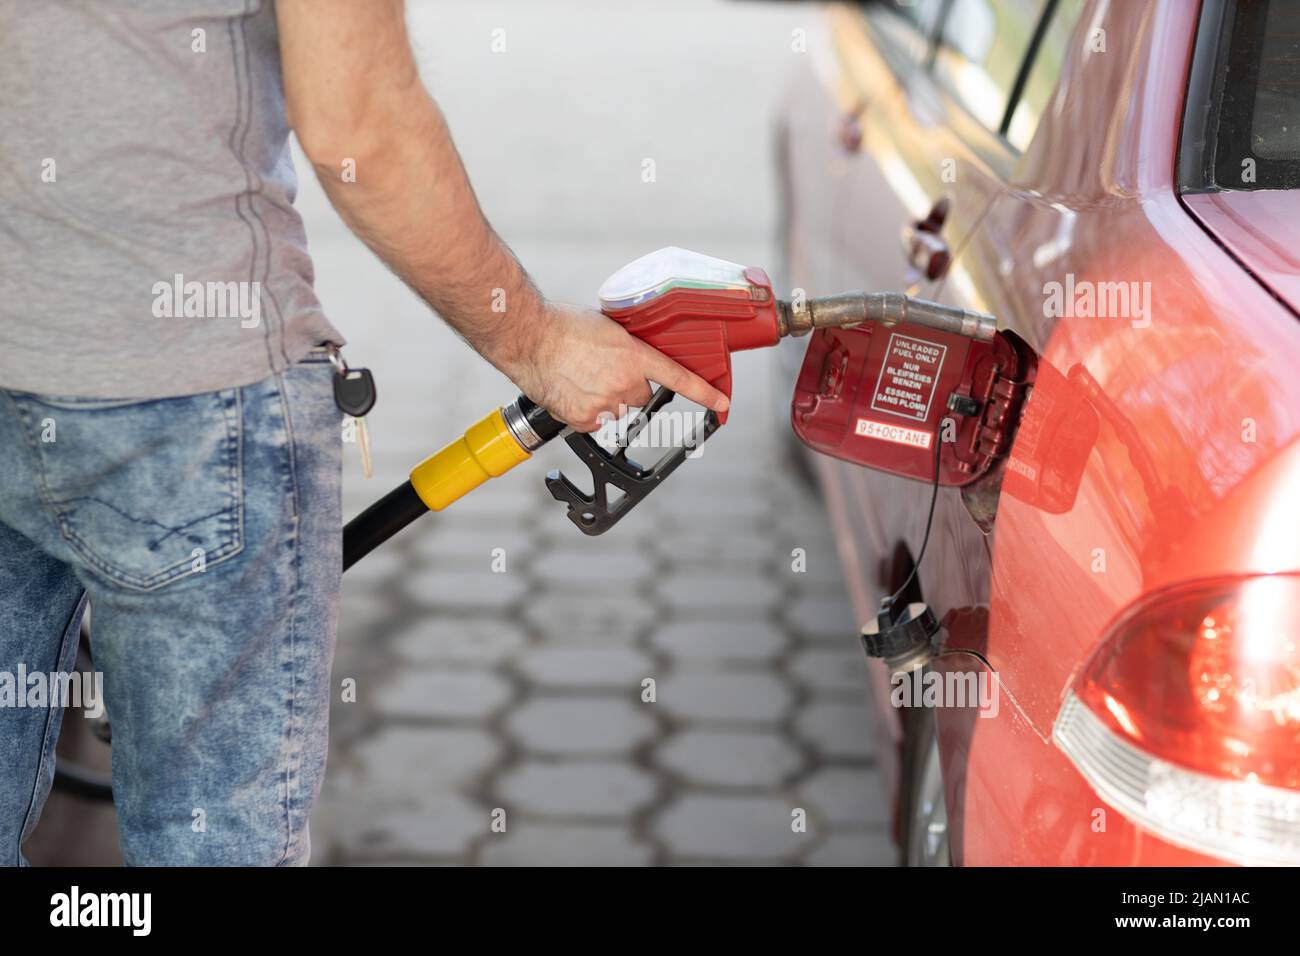 Man filling fuel tank in his hand at gas station. Sanctions economy crisis Stock Photo